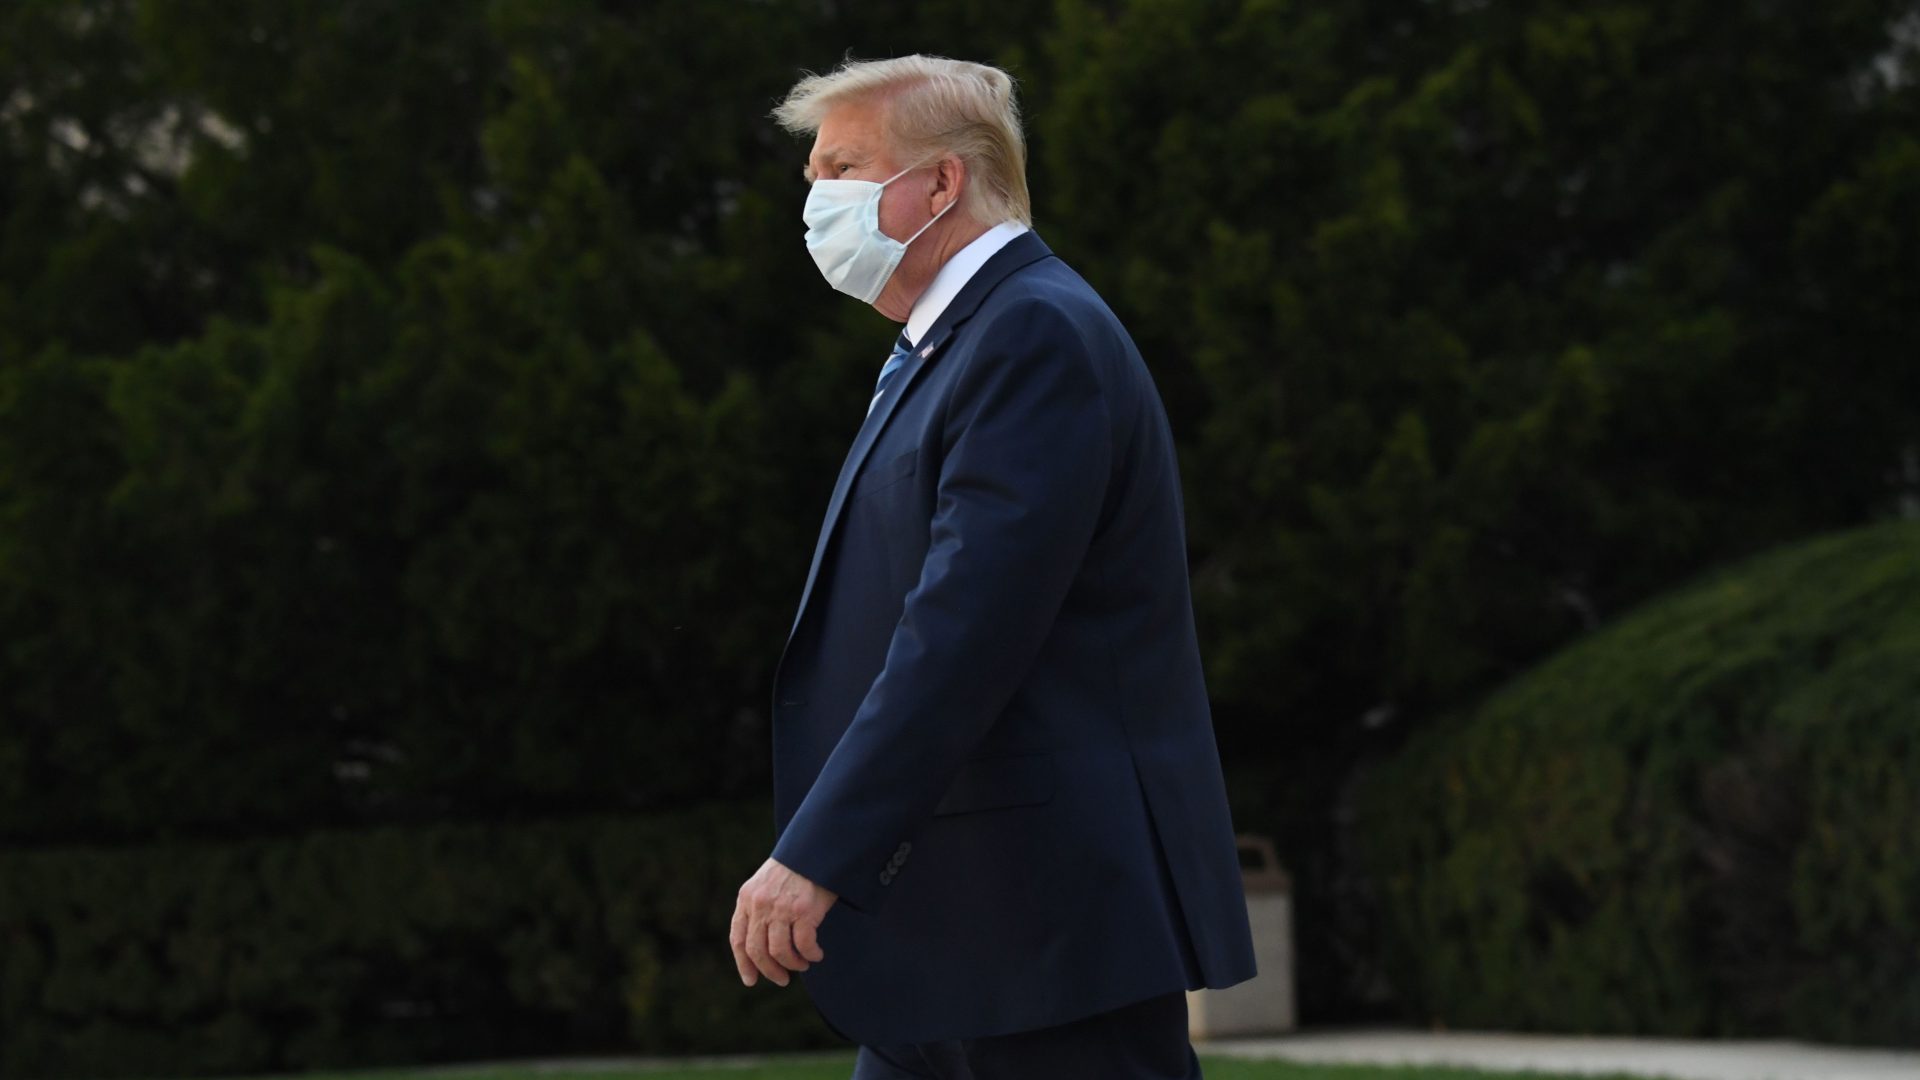 US President Donald Trump leaves Walter Reed Medical Center in Bethesda, Maryland heading towards Marine One on October 5, 2020, to return to the White House after being discharged. - Trump announced Monday he would be 